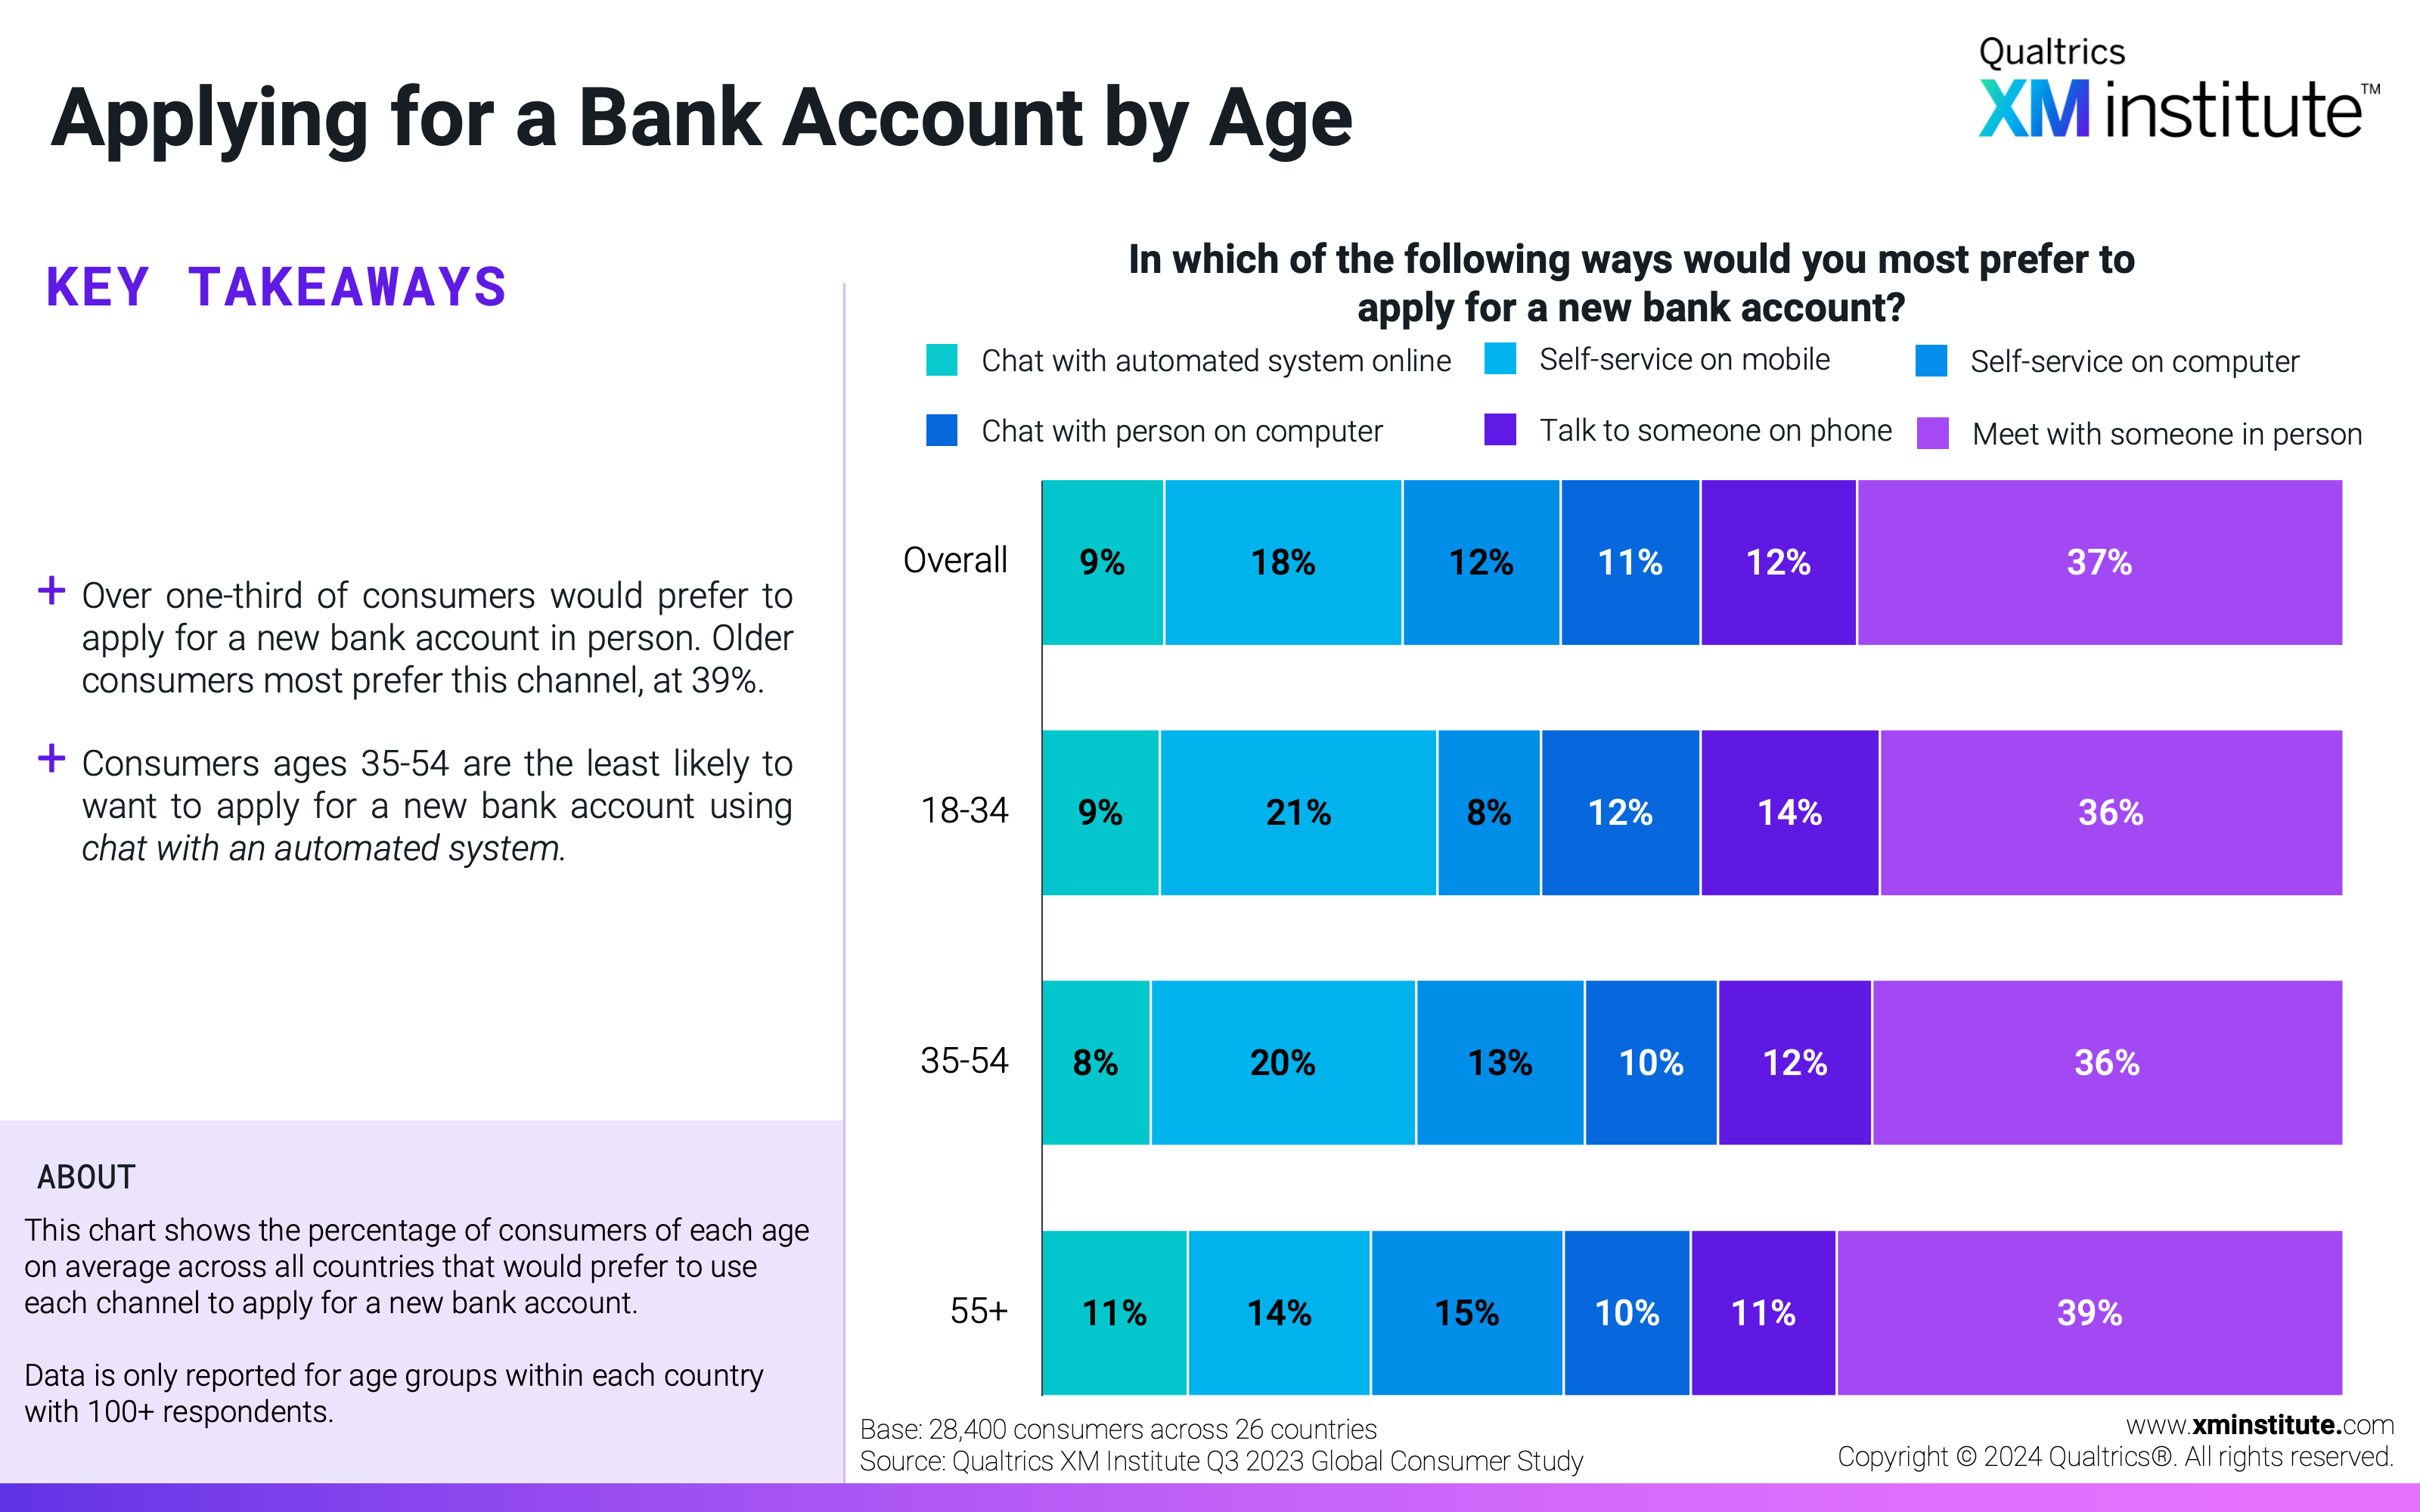 This chart shows the percentage of consumers of each age on average across all countries that would prefer to use each channel to apply for a new bank account. 